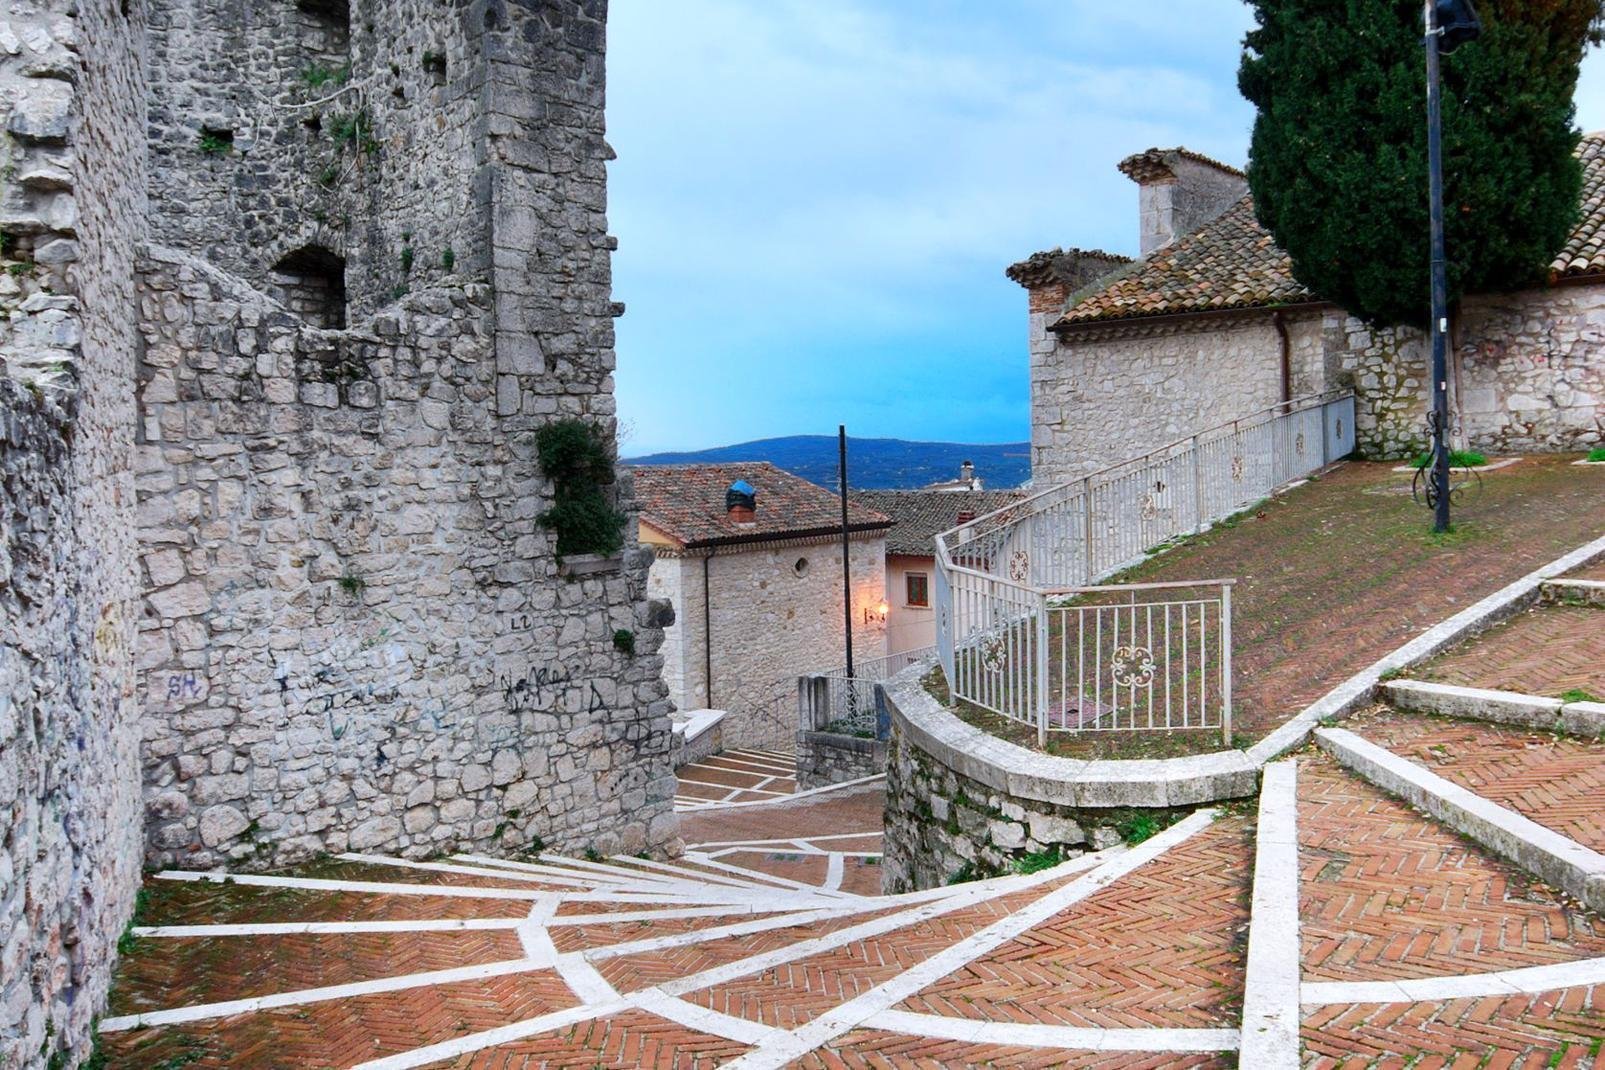 The city of Campobasso is the administrative centre of the province of the same name, and of the region of Molise.